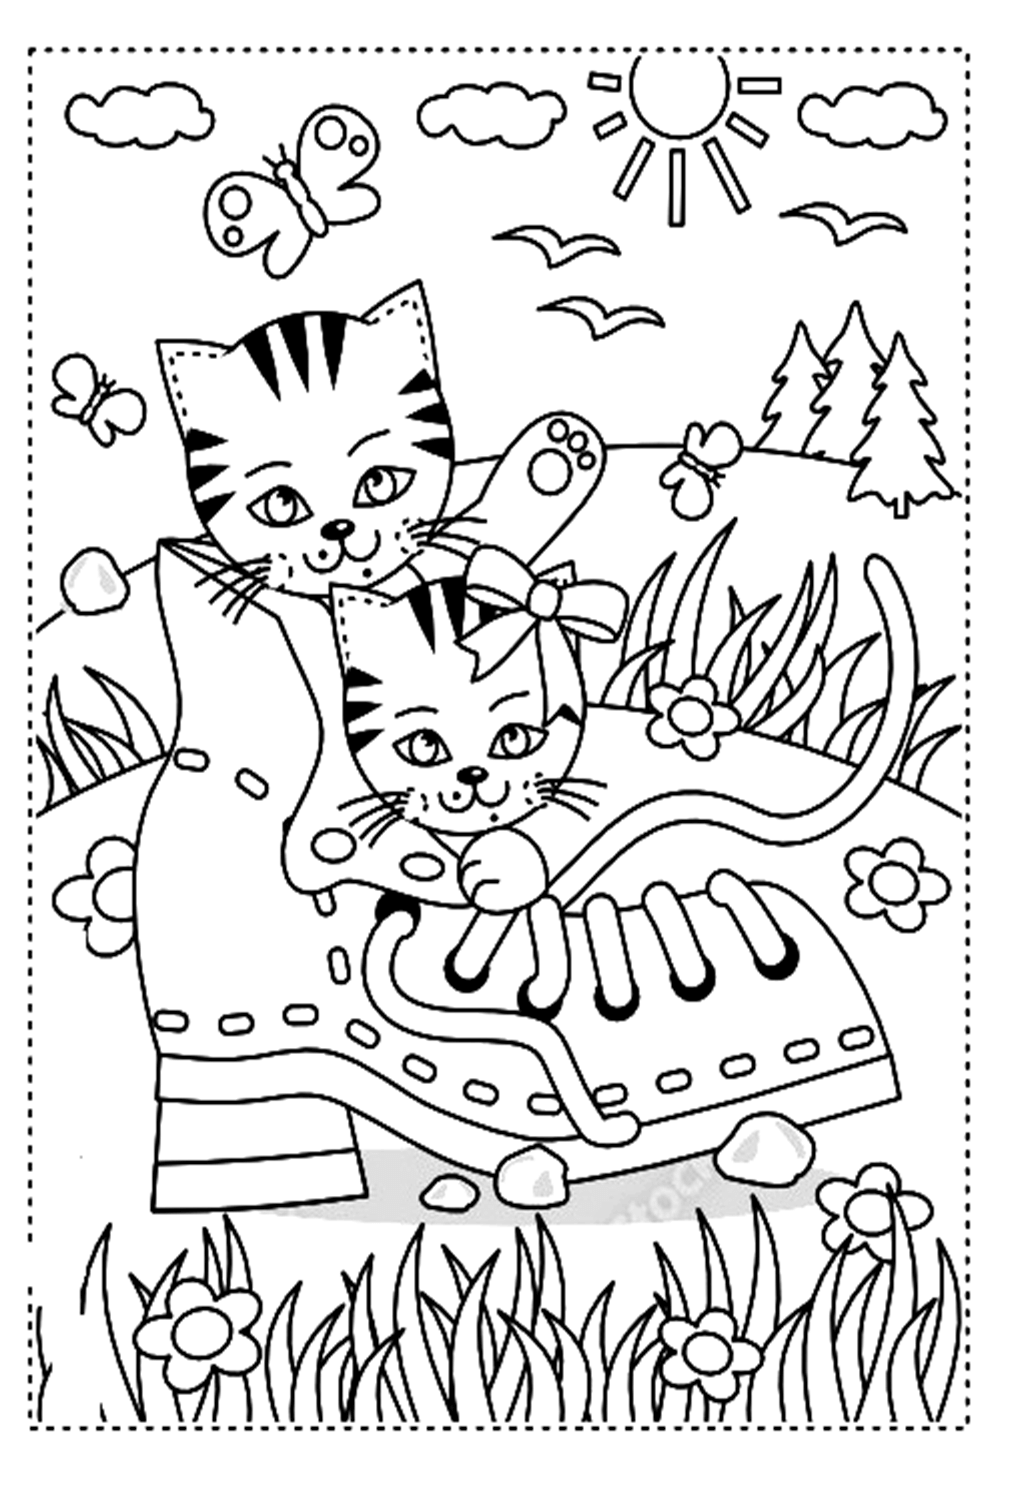 Cats In Boot Coloring Page from Boots